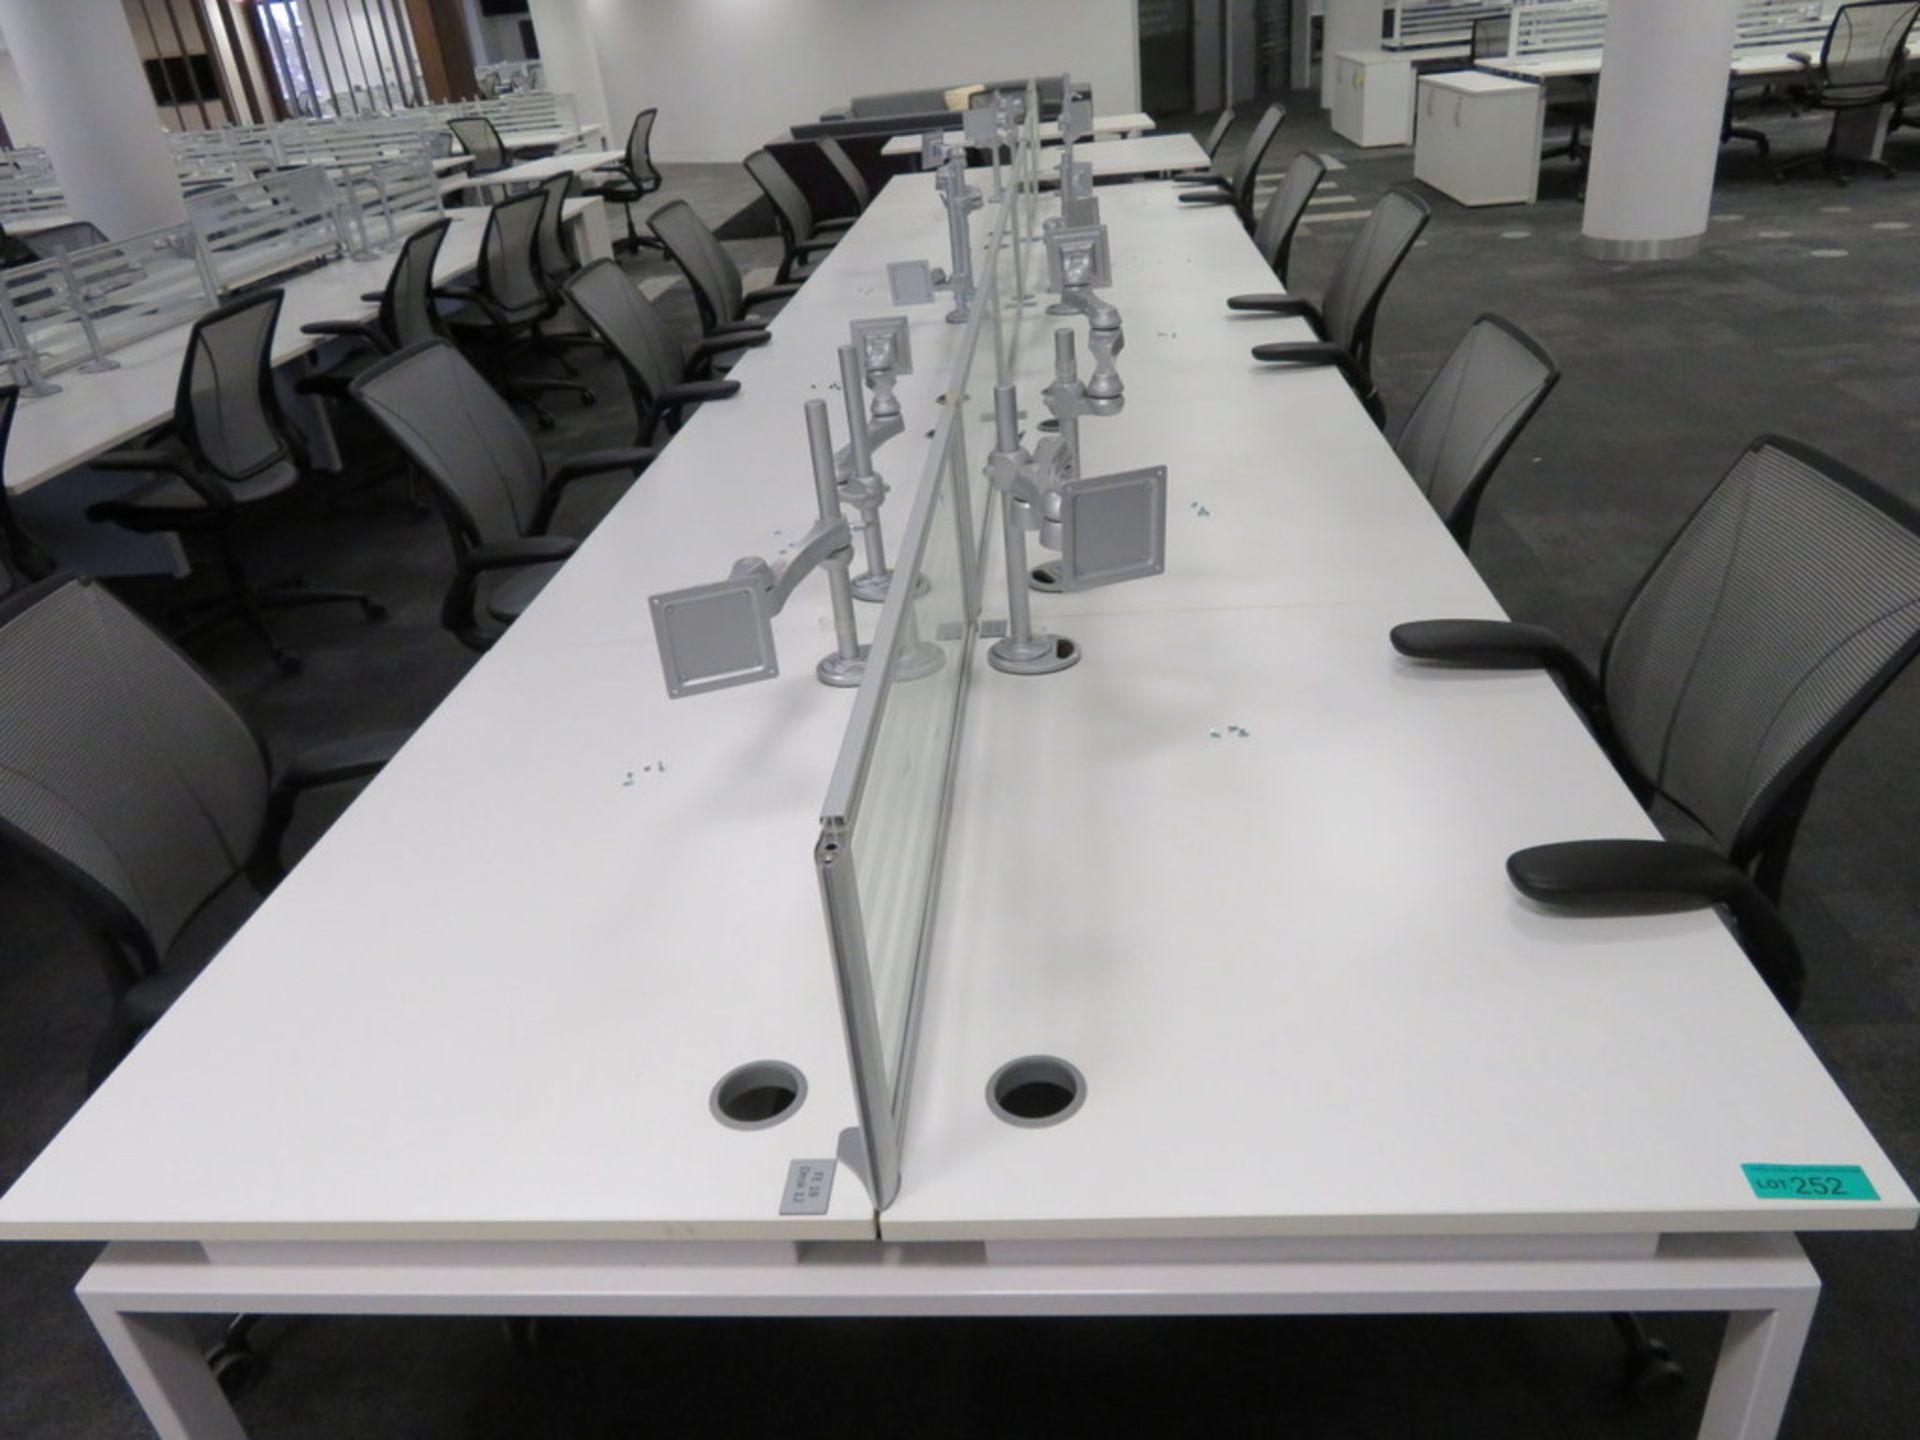 12 Person Desk Arrangement With Dividers & Monitor Arms. Please Note The Chairs Are Not Included. - Image 2 of 3